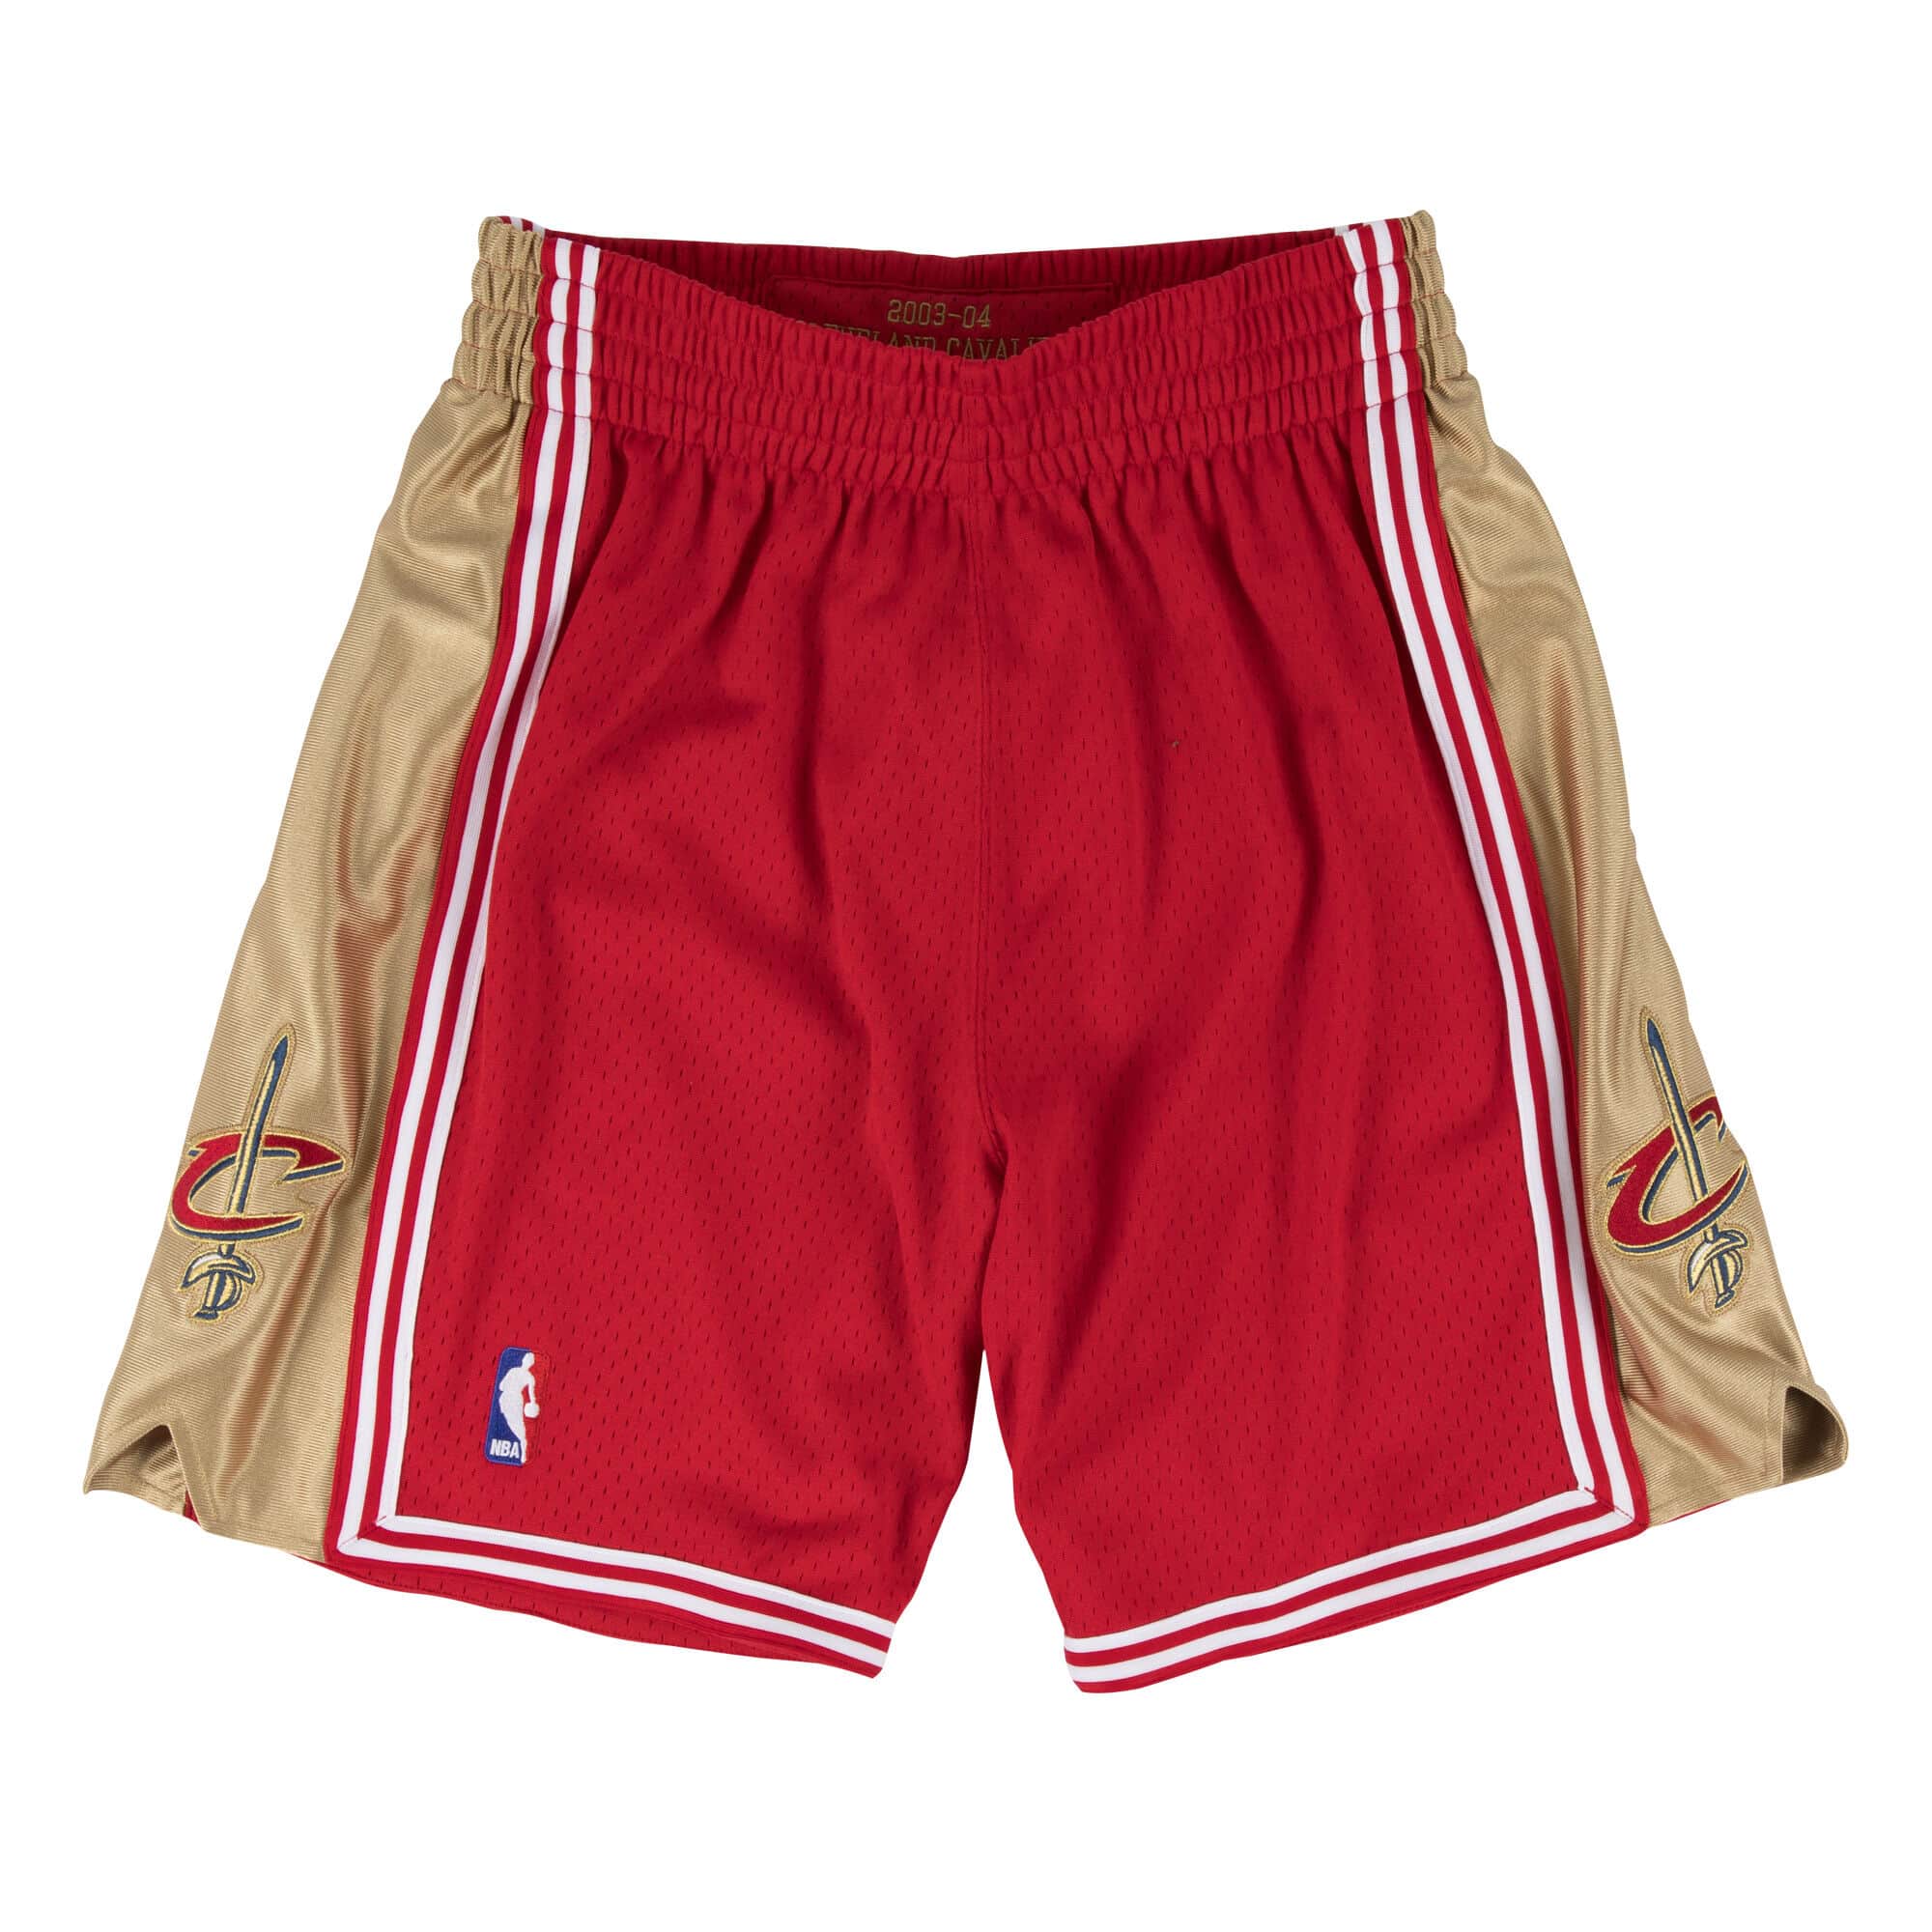 Mitchell & Ness NBA Authentic Shorts Cleveland Cavaliers Dark Red  ASHCCADR03 ()